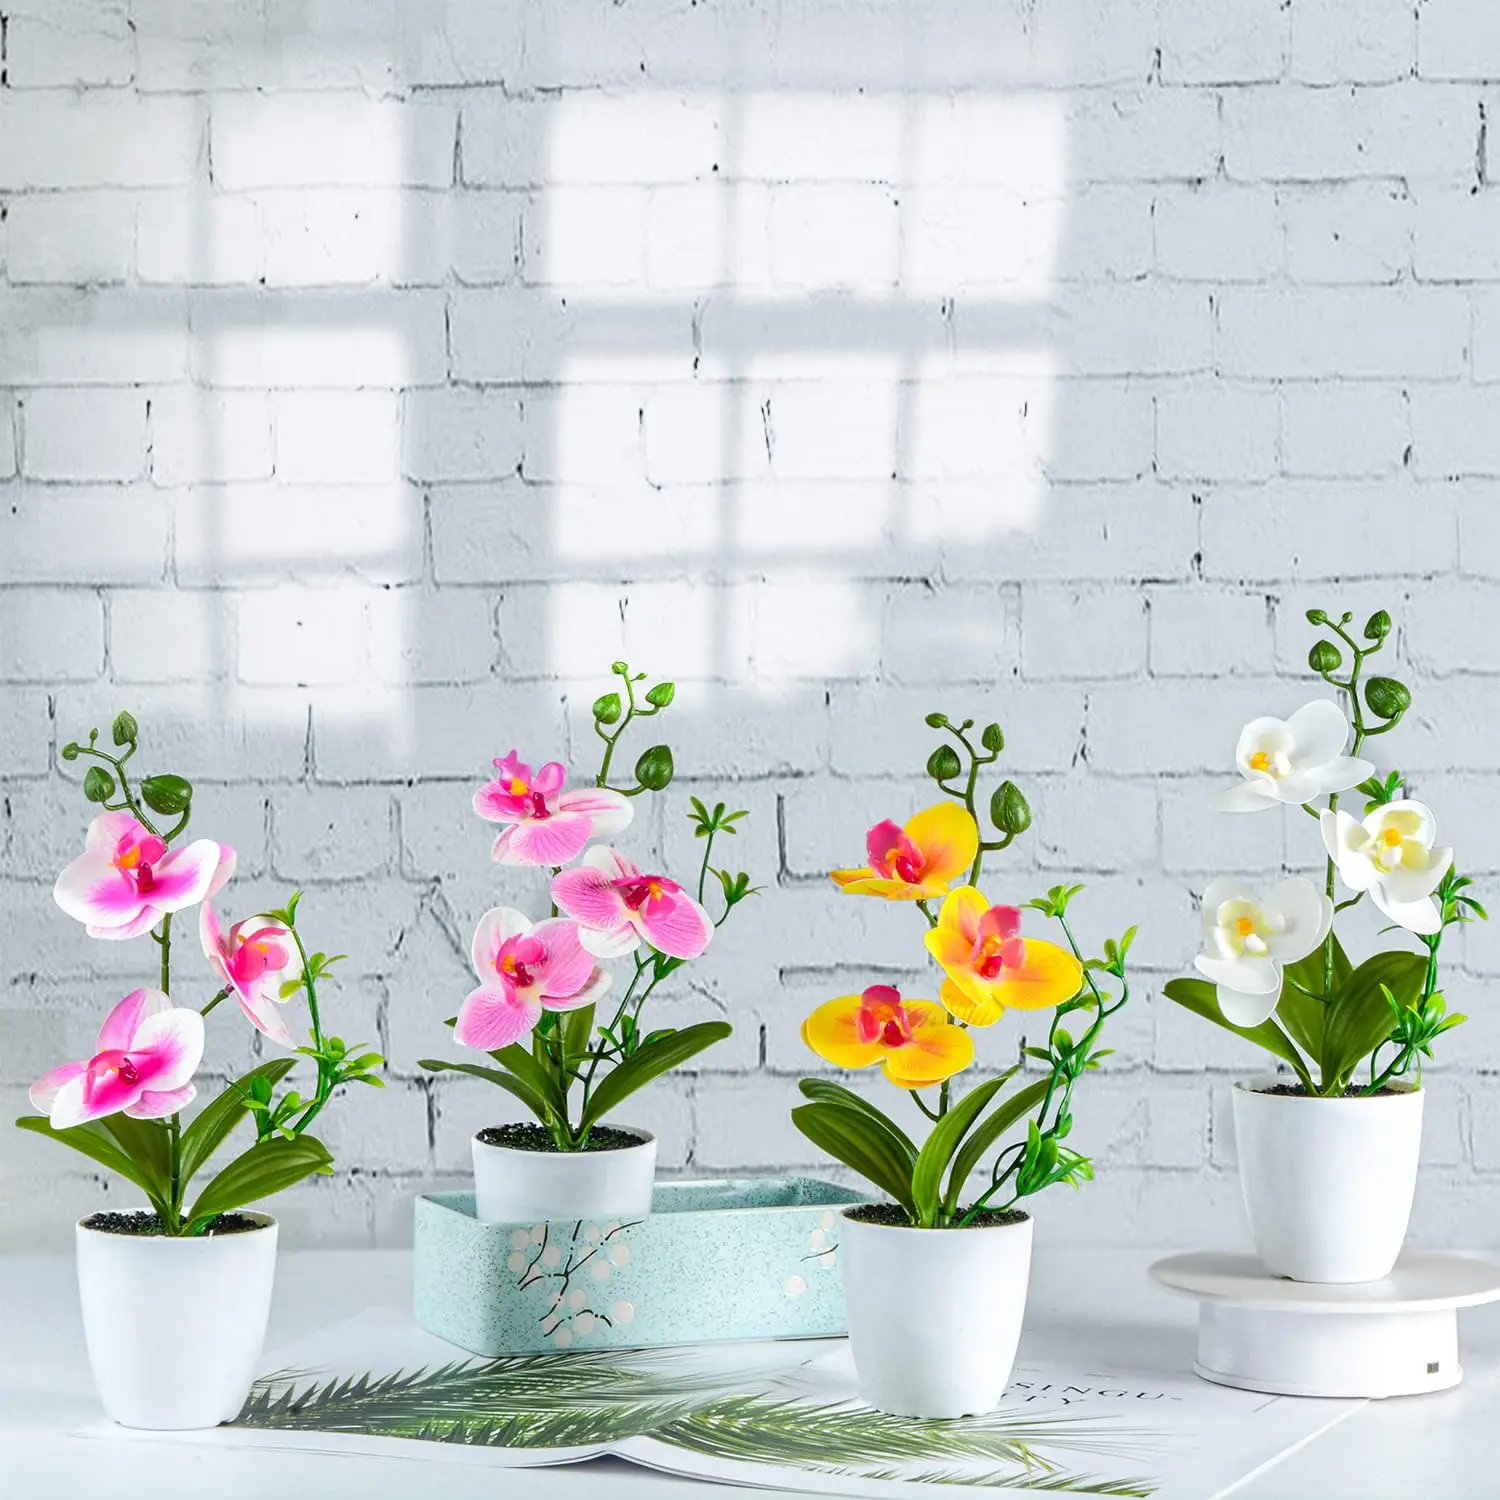 

4Pcs Artificial Mini Potted Fake Orchids With Plastic Vase for Home Office Table Decoration (White, Yellow, Pink)